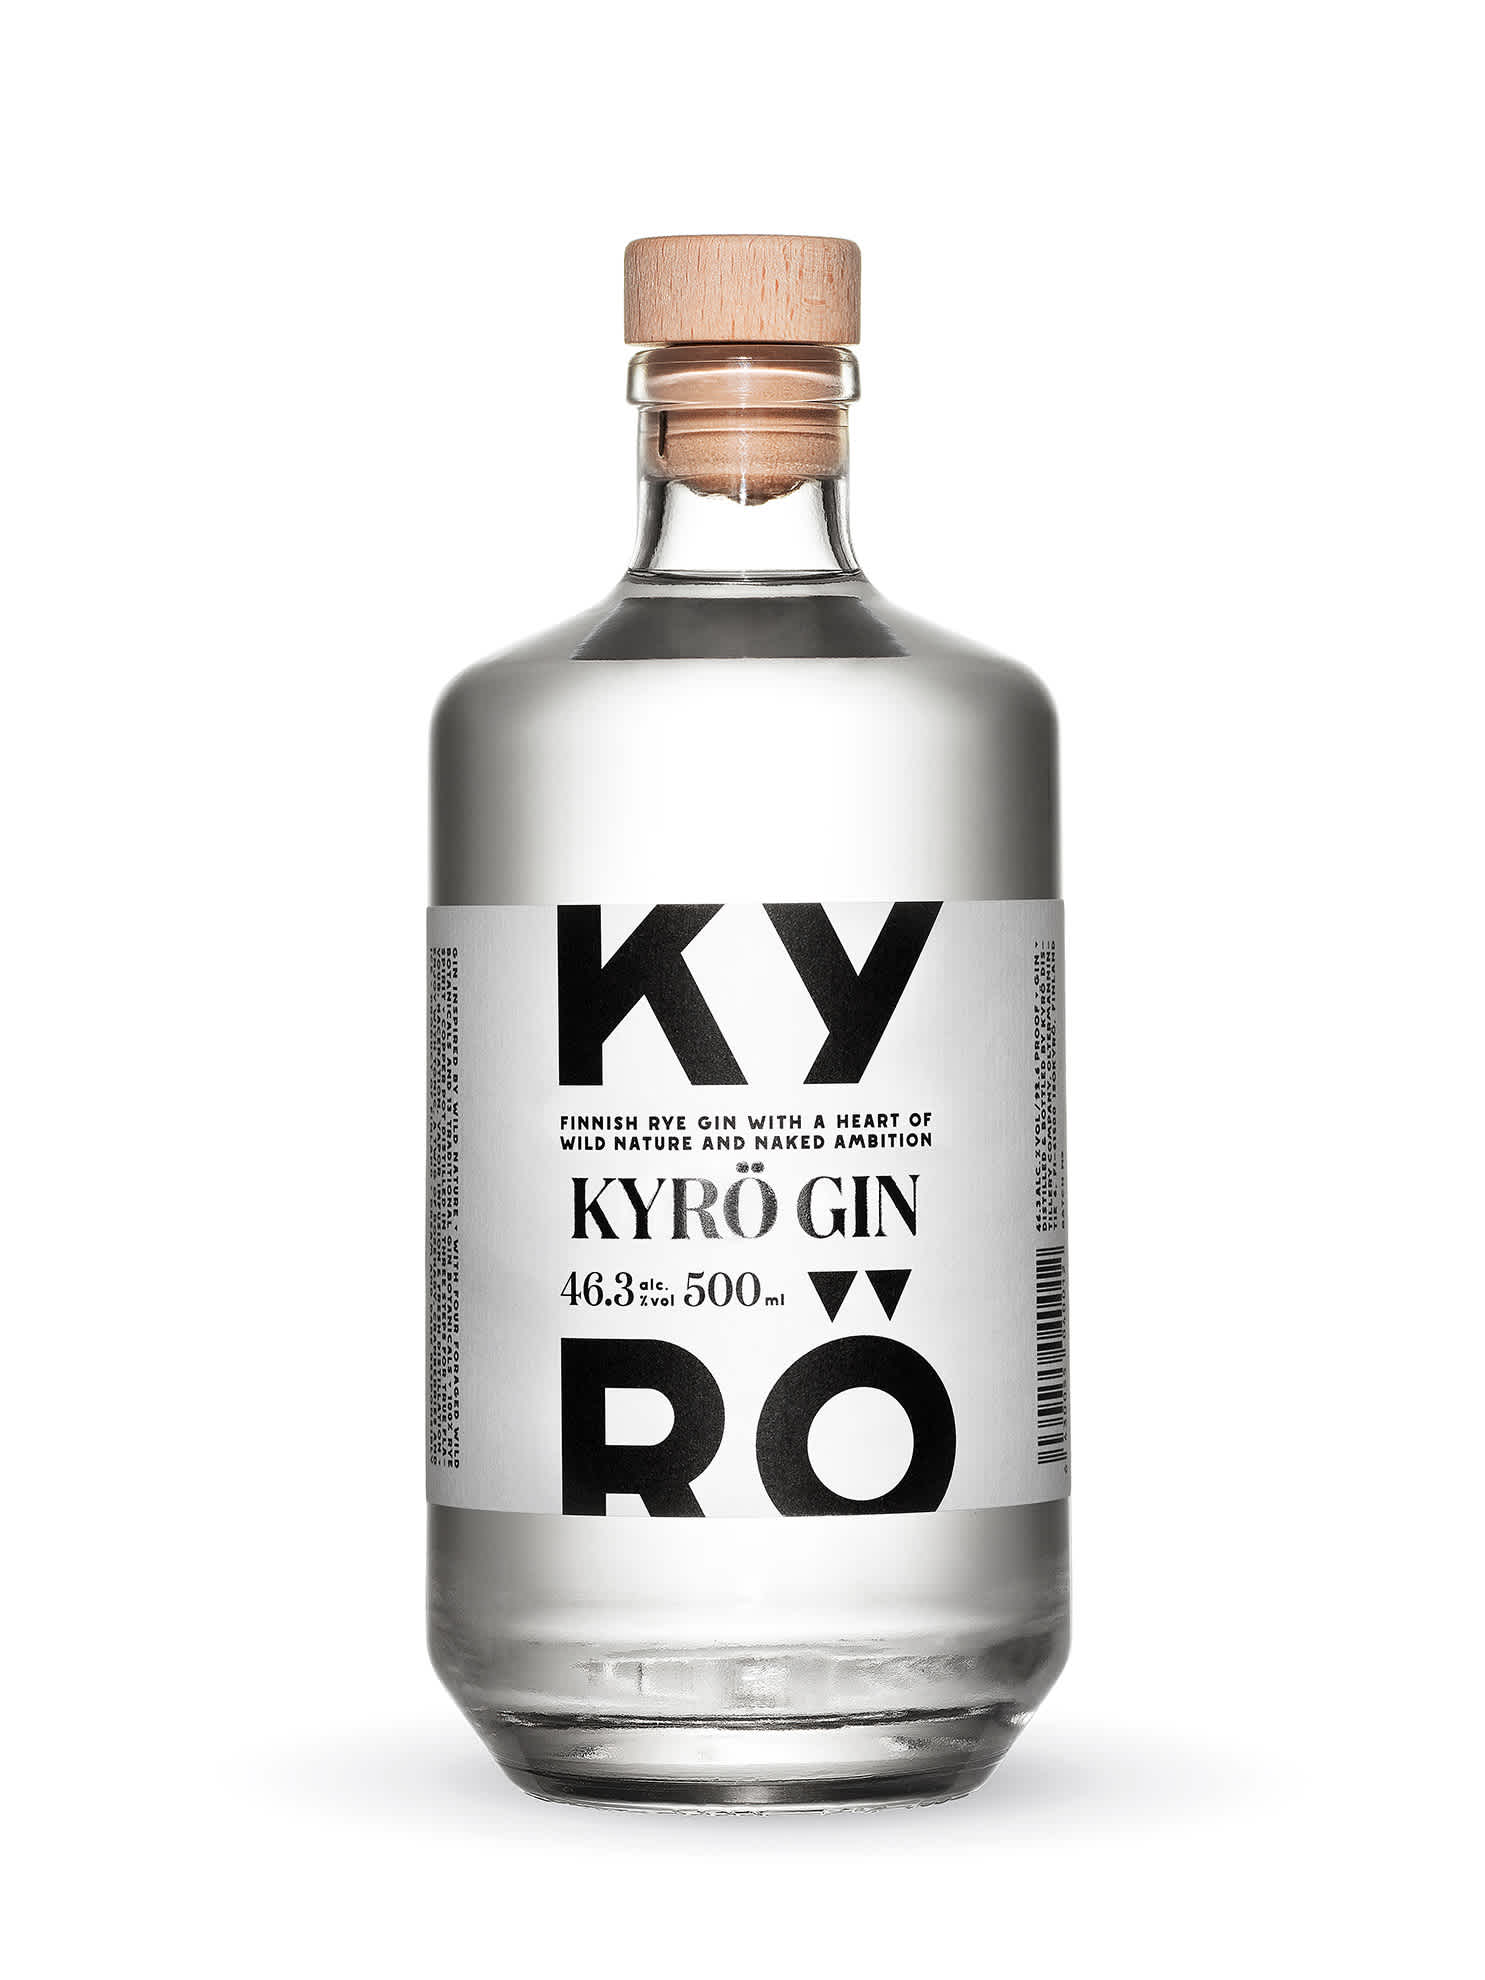 Product photo: 0,5l bottle of award-winning Kyrö Gin made with Finnish rye from the Kyrö Distillery Company.